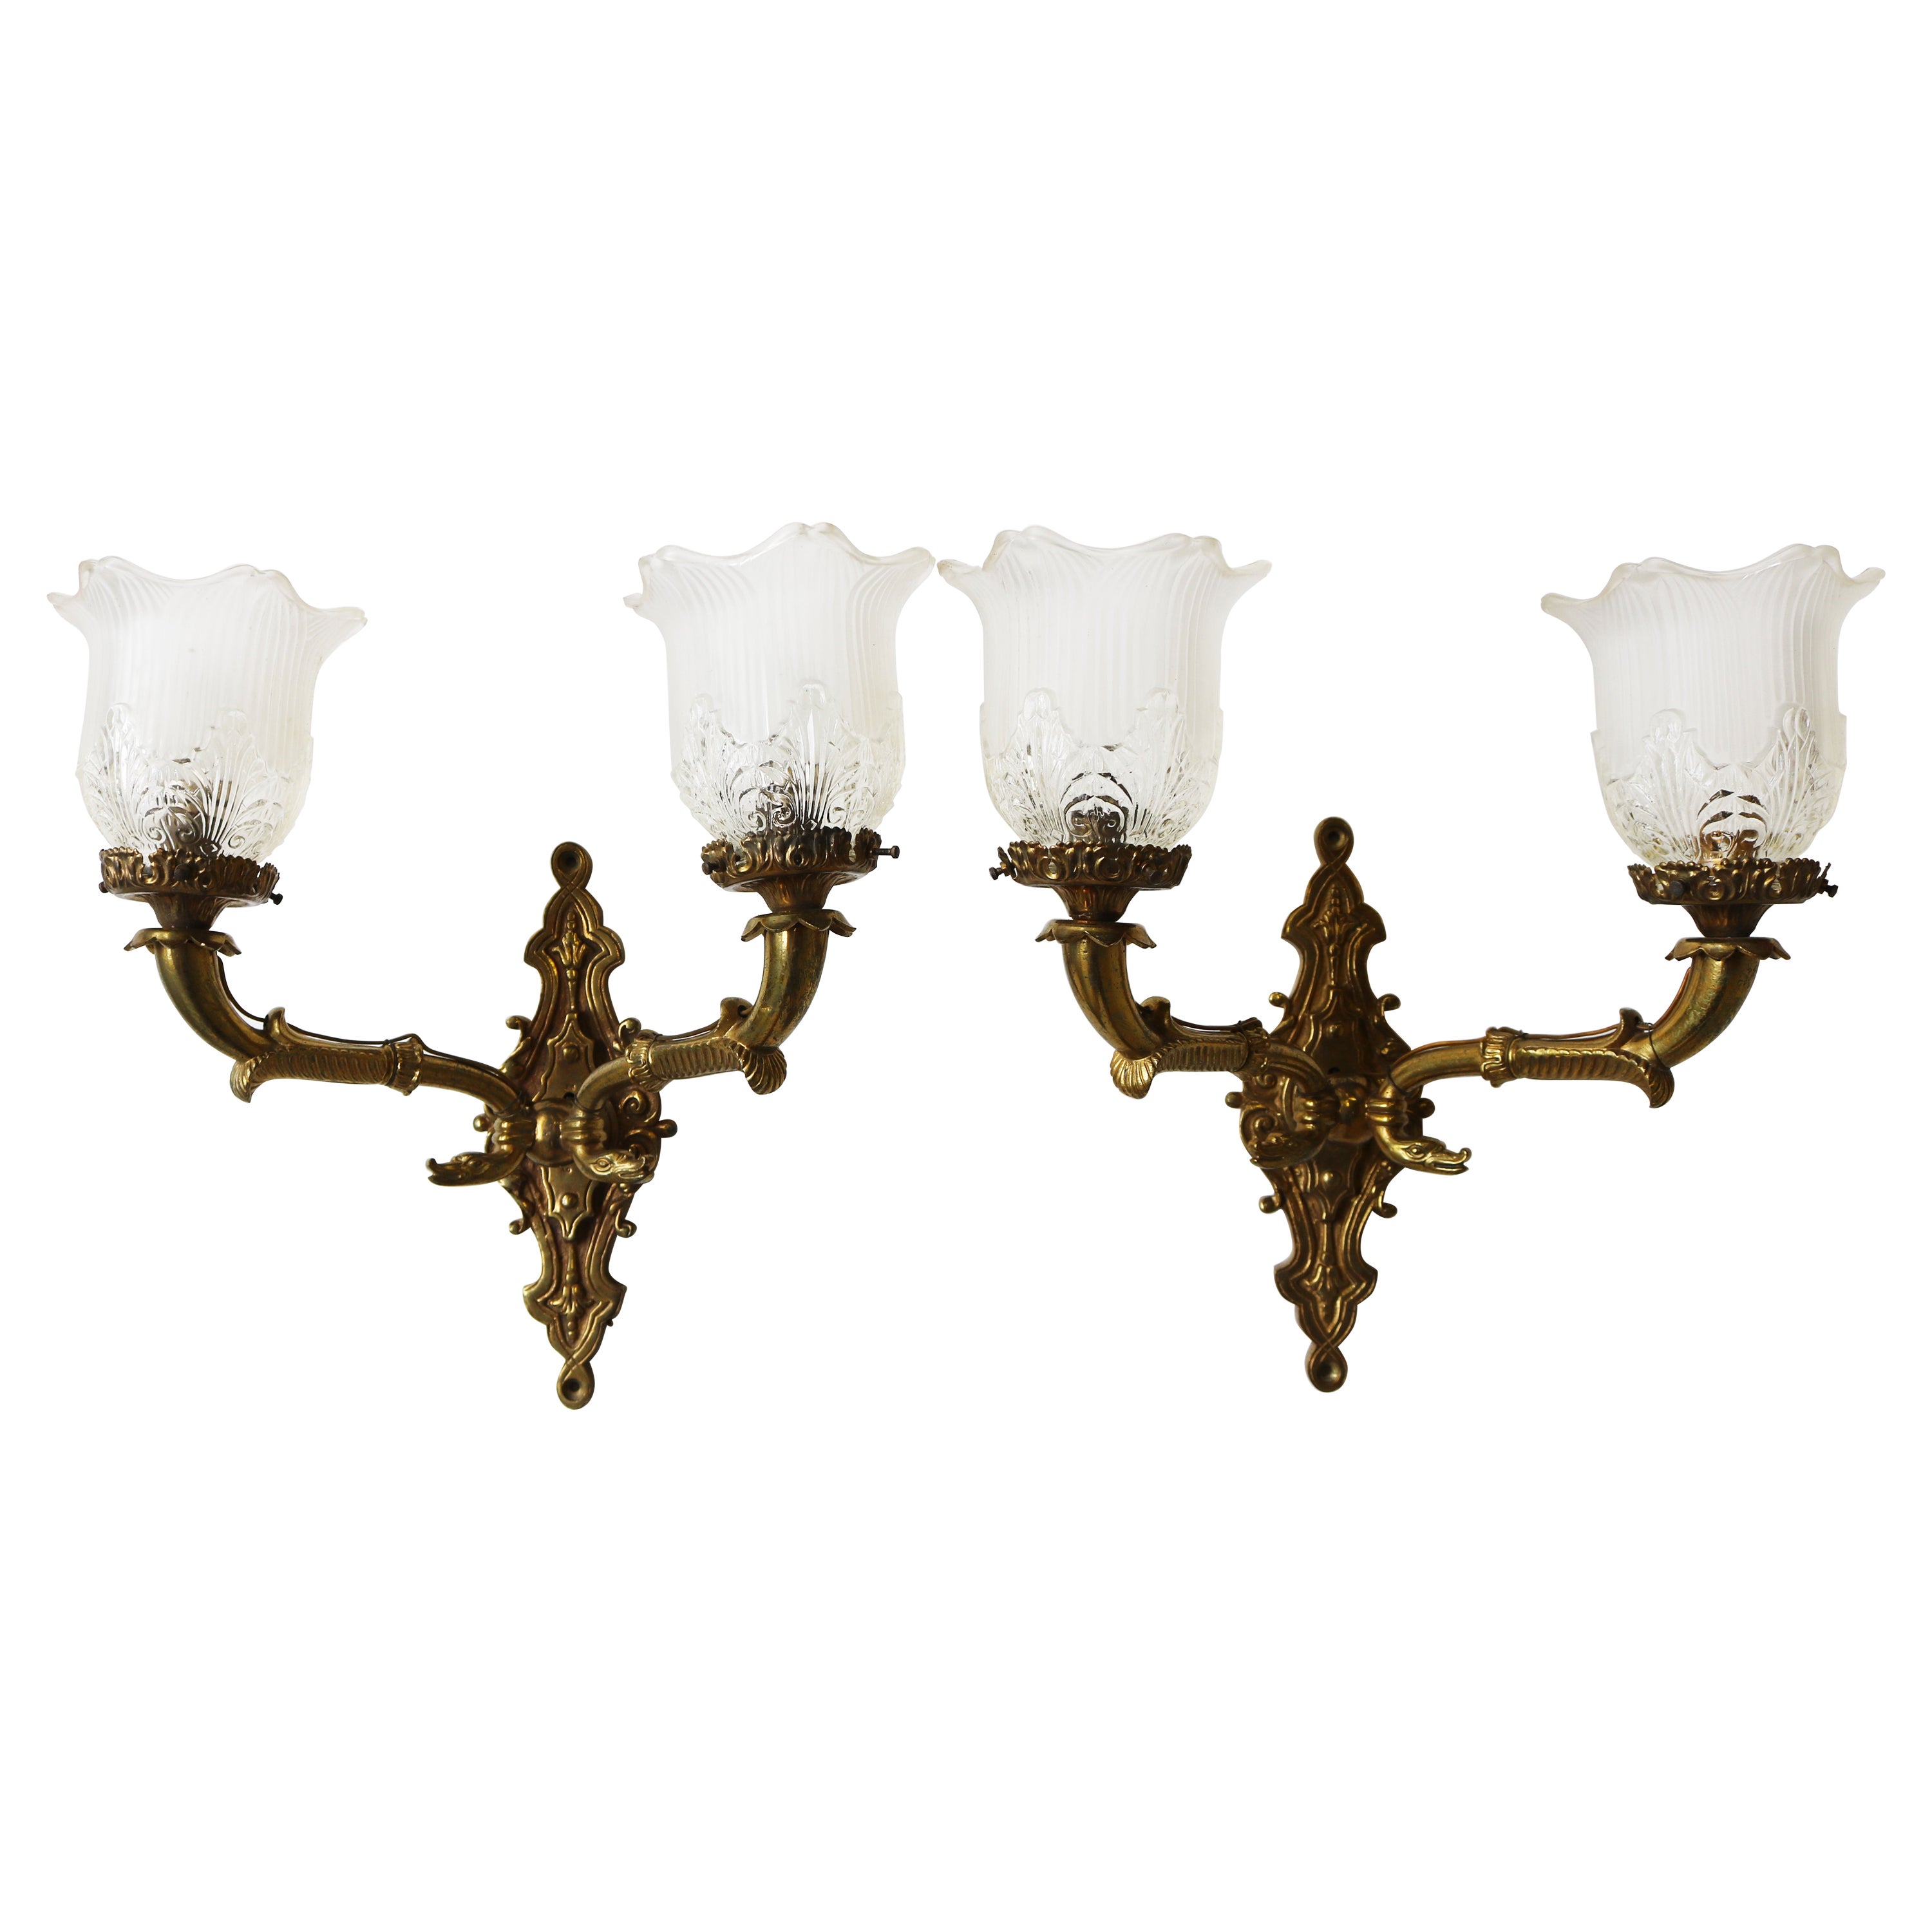 Pair of Brass Empire 19th Century Wall Lights with Serpent Heads Sconces Glass